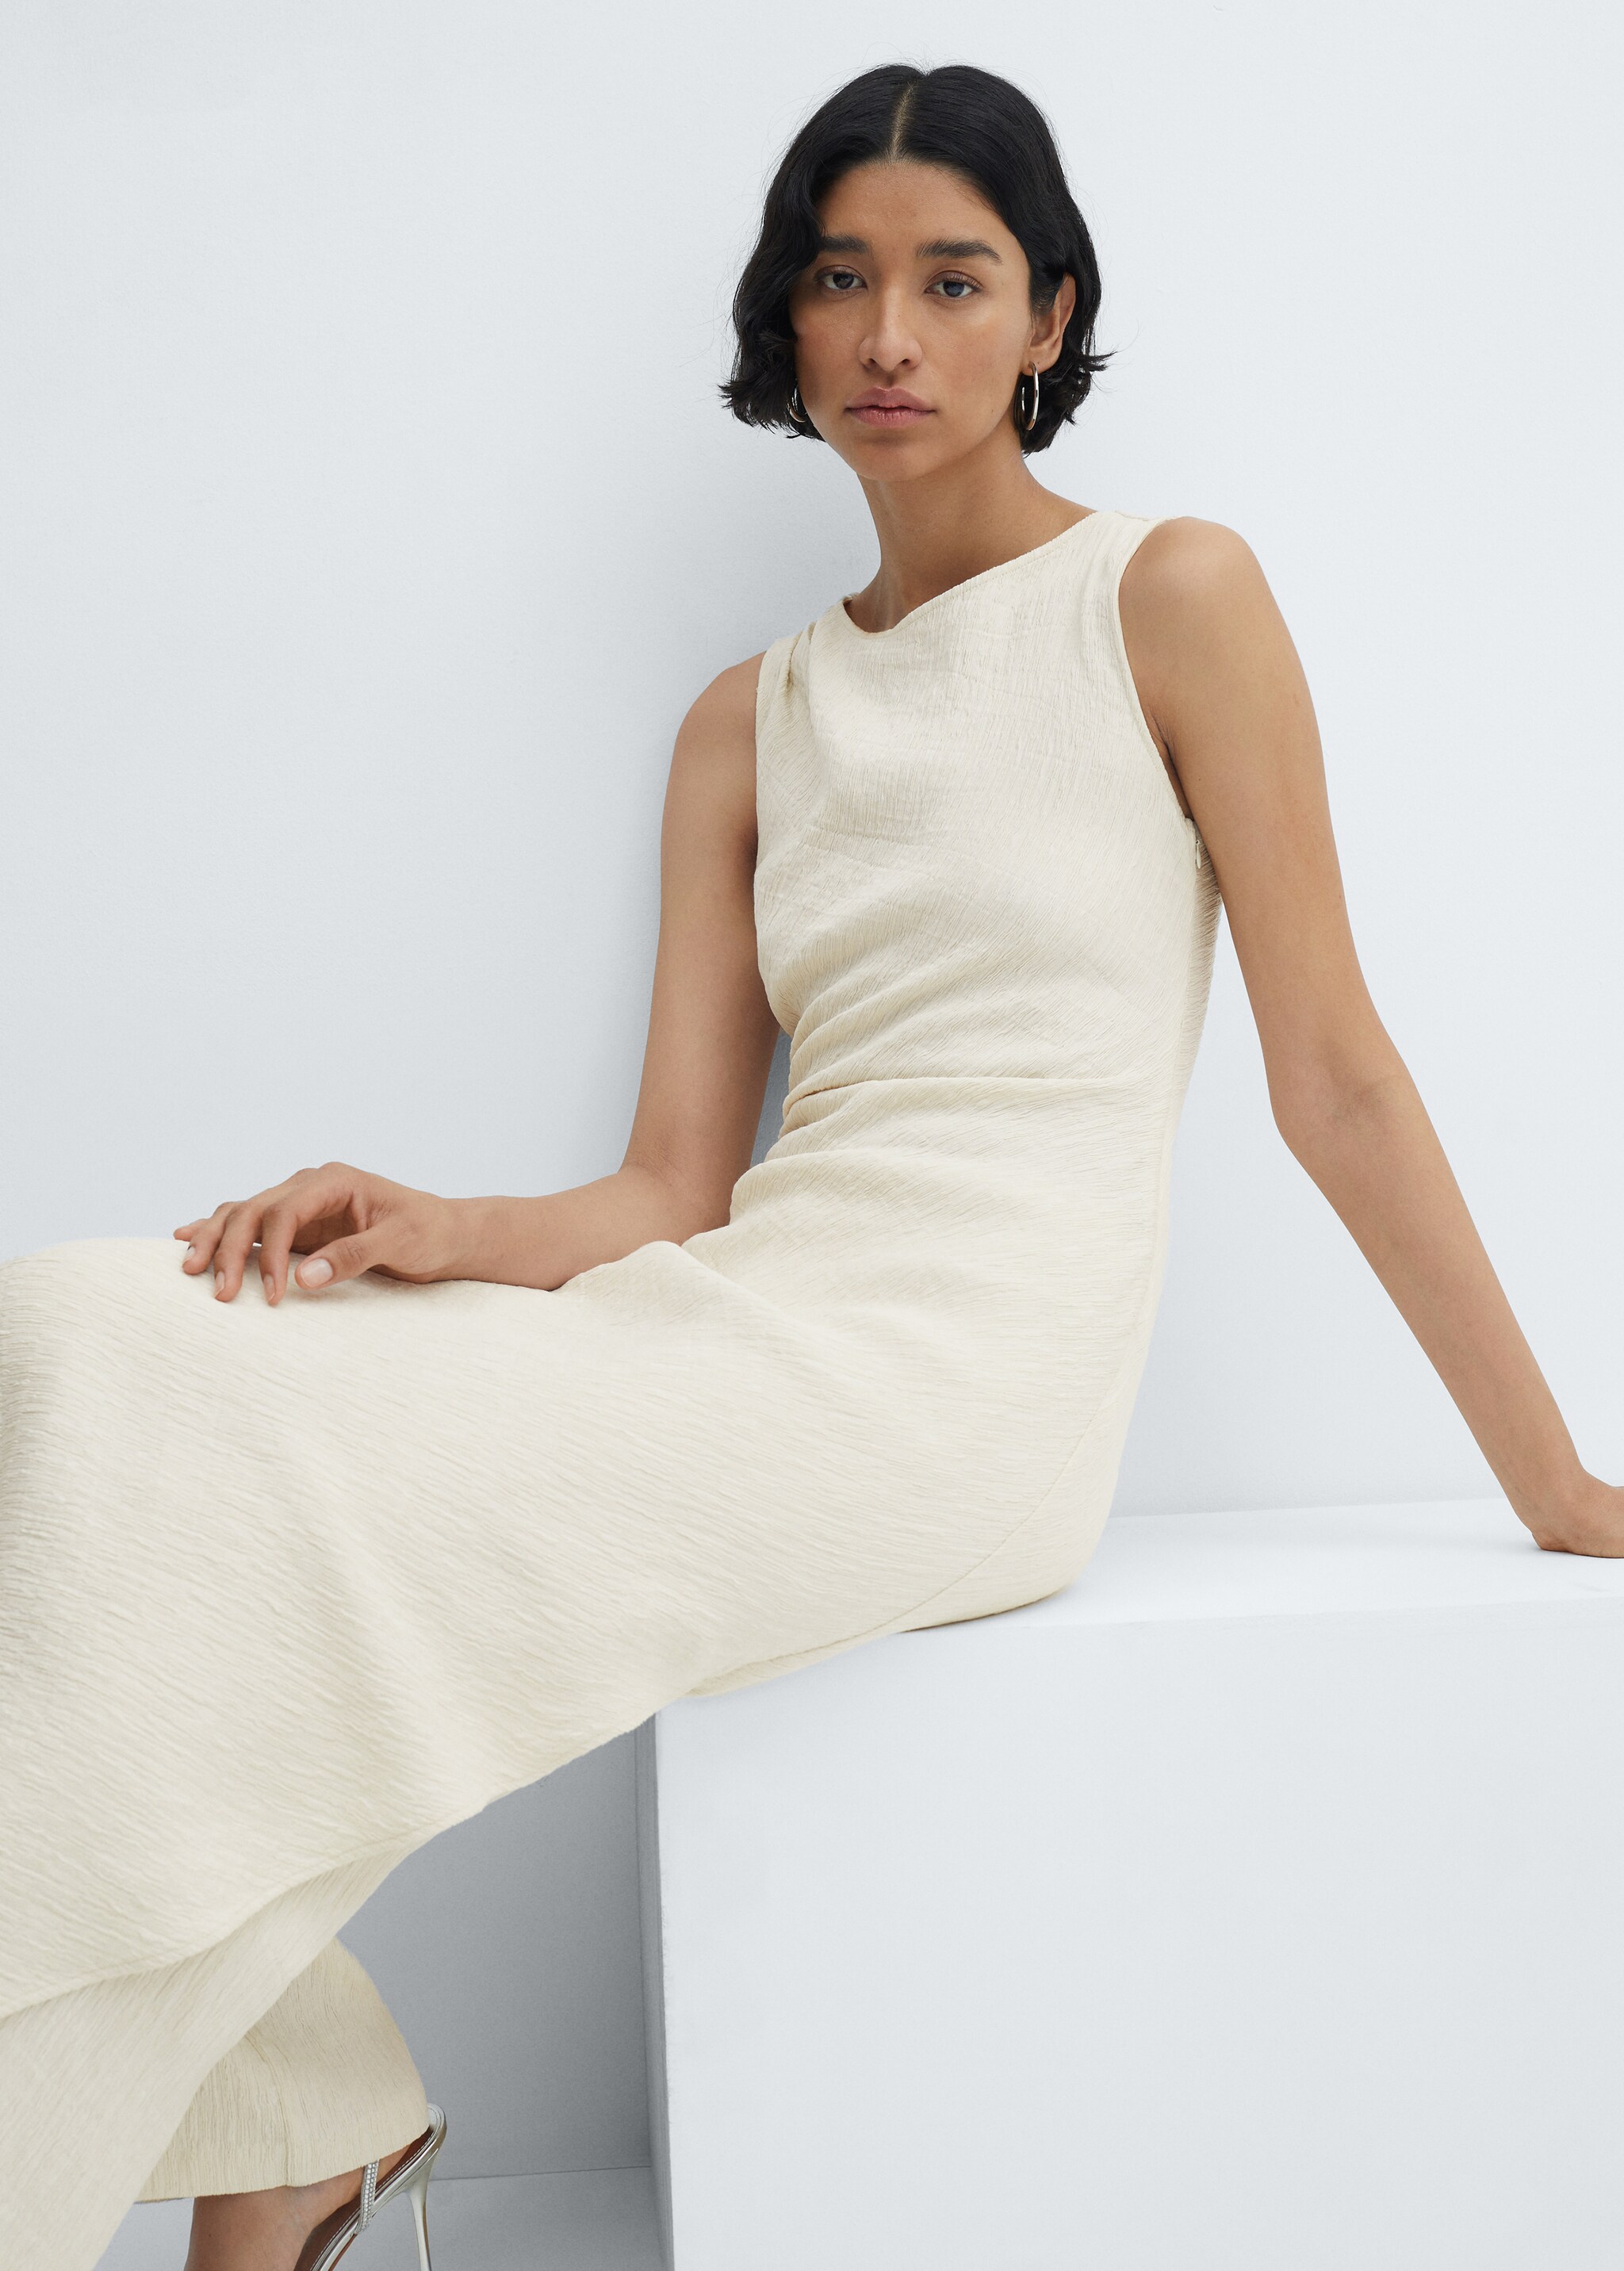 Draped dress with slit - Details of the article 2